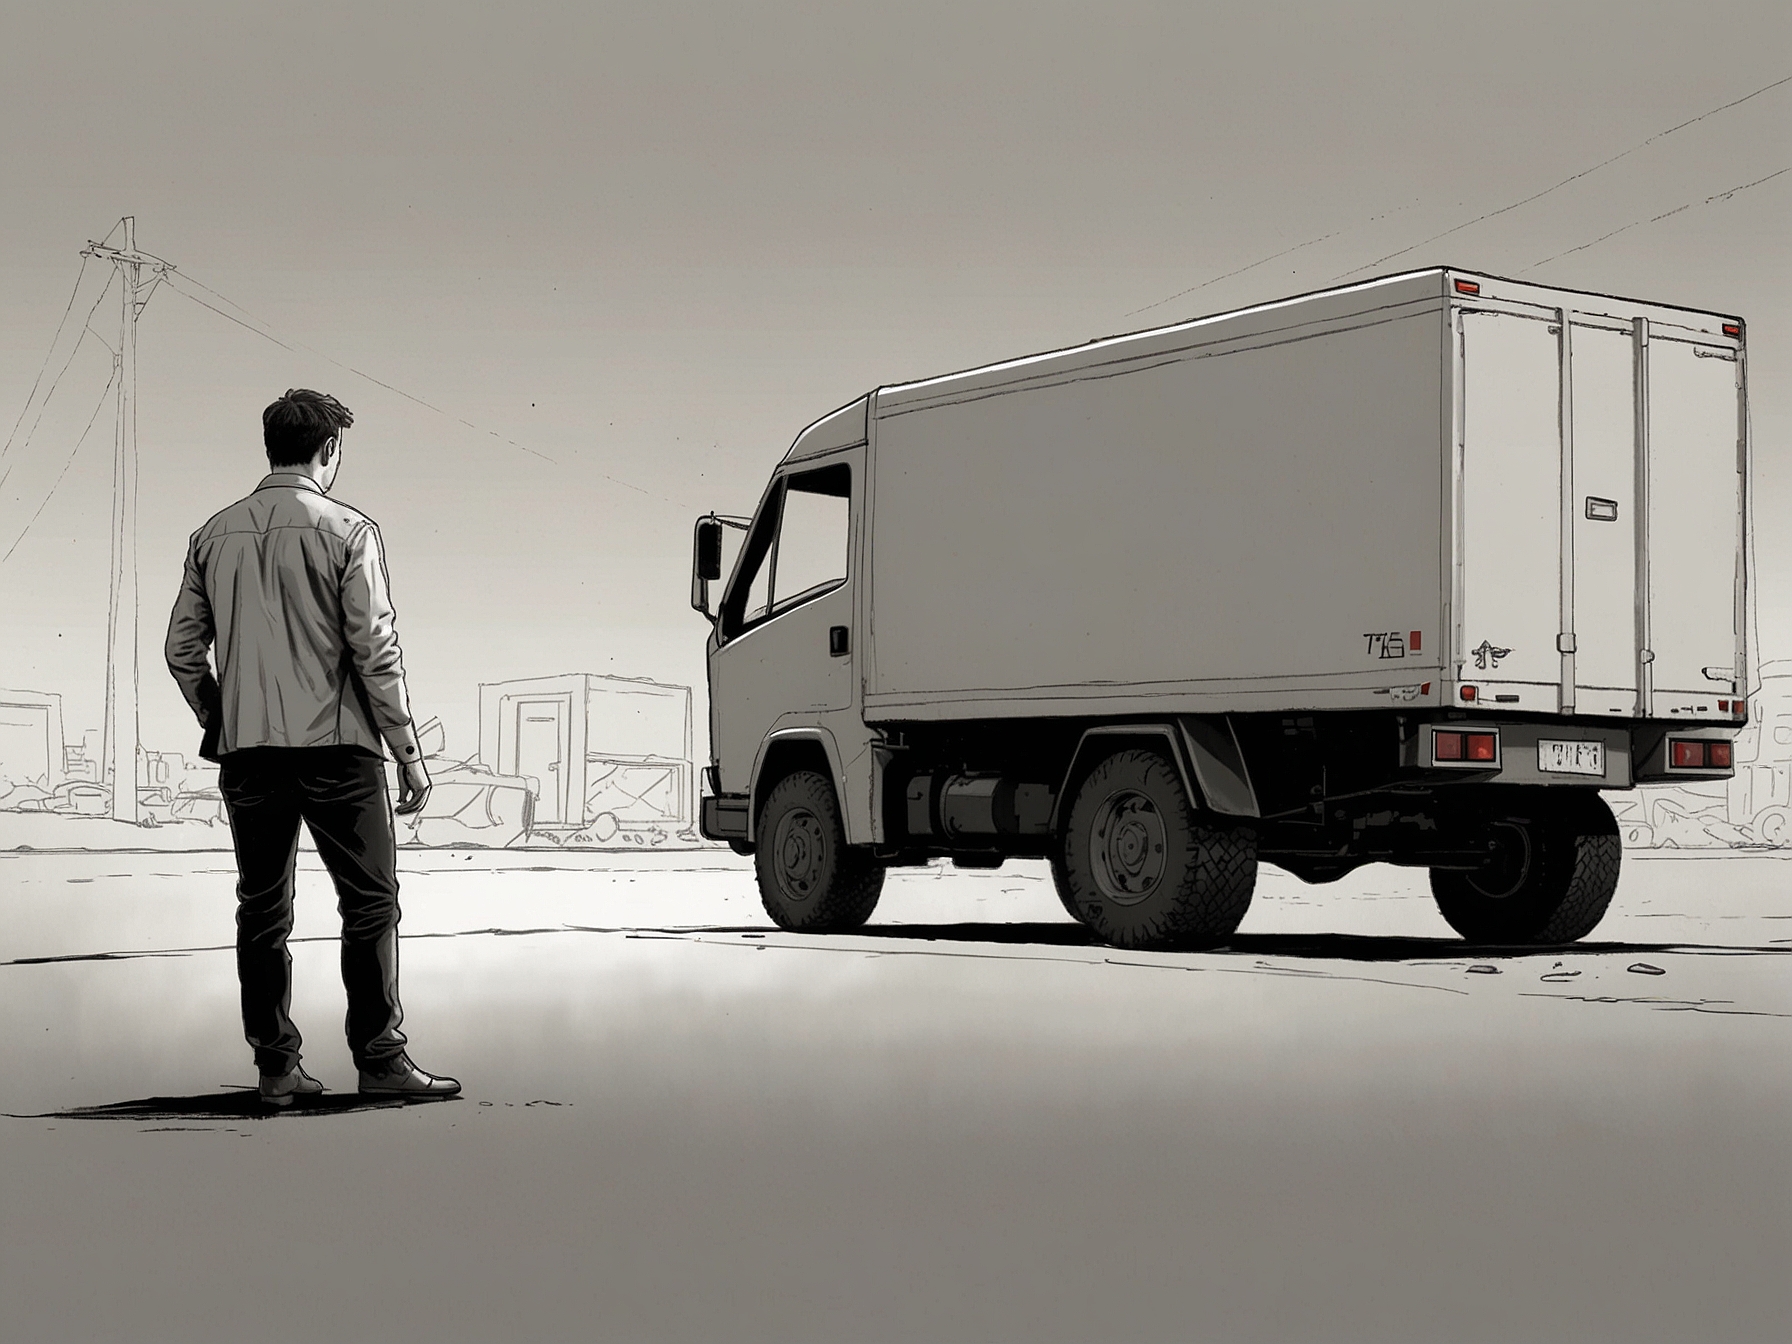 An image depicting a disappointed Tesla customer looking at their undelivered Cybertruck, symbolizing the frustration and anticipation among buyers due to the delivery cancellations.